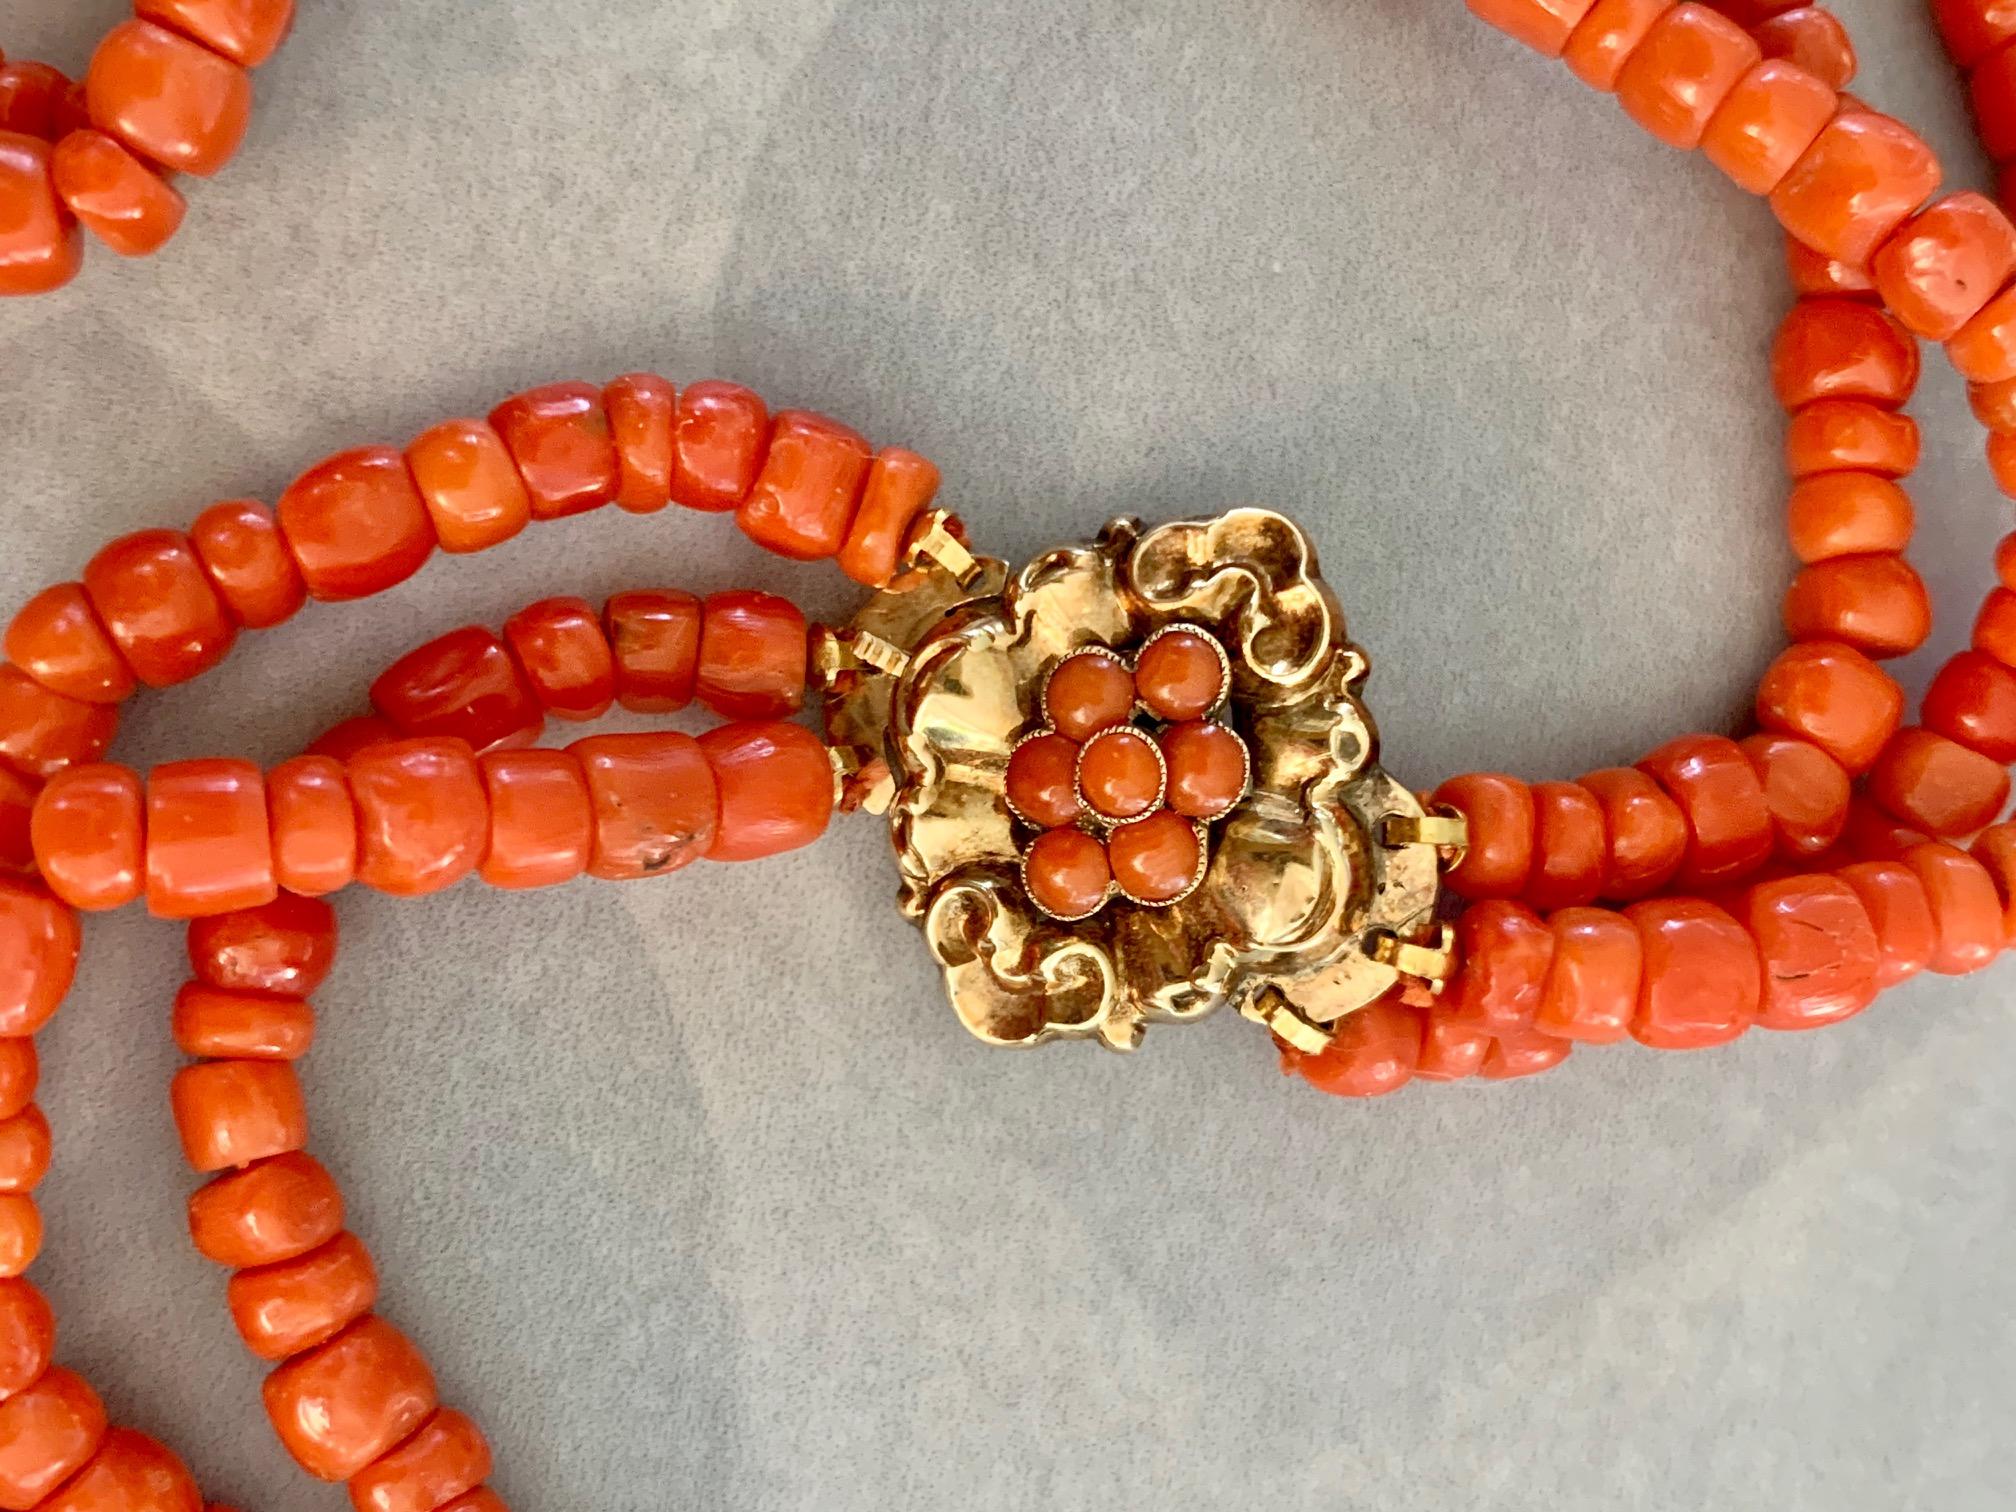 Vintage Three-Strand Graduated Natural Coral Necklace with 14 Karat Gold Clasp In Good Condition For Sale In St. Louis Park, MN